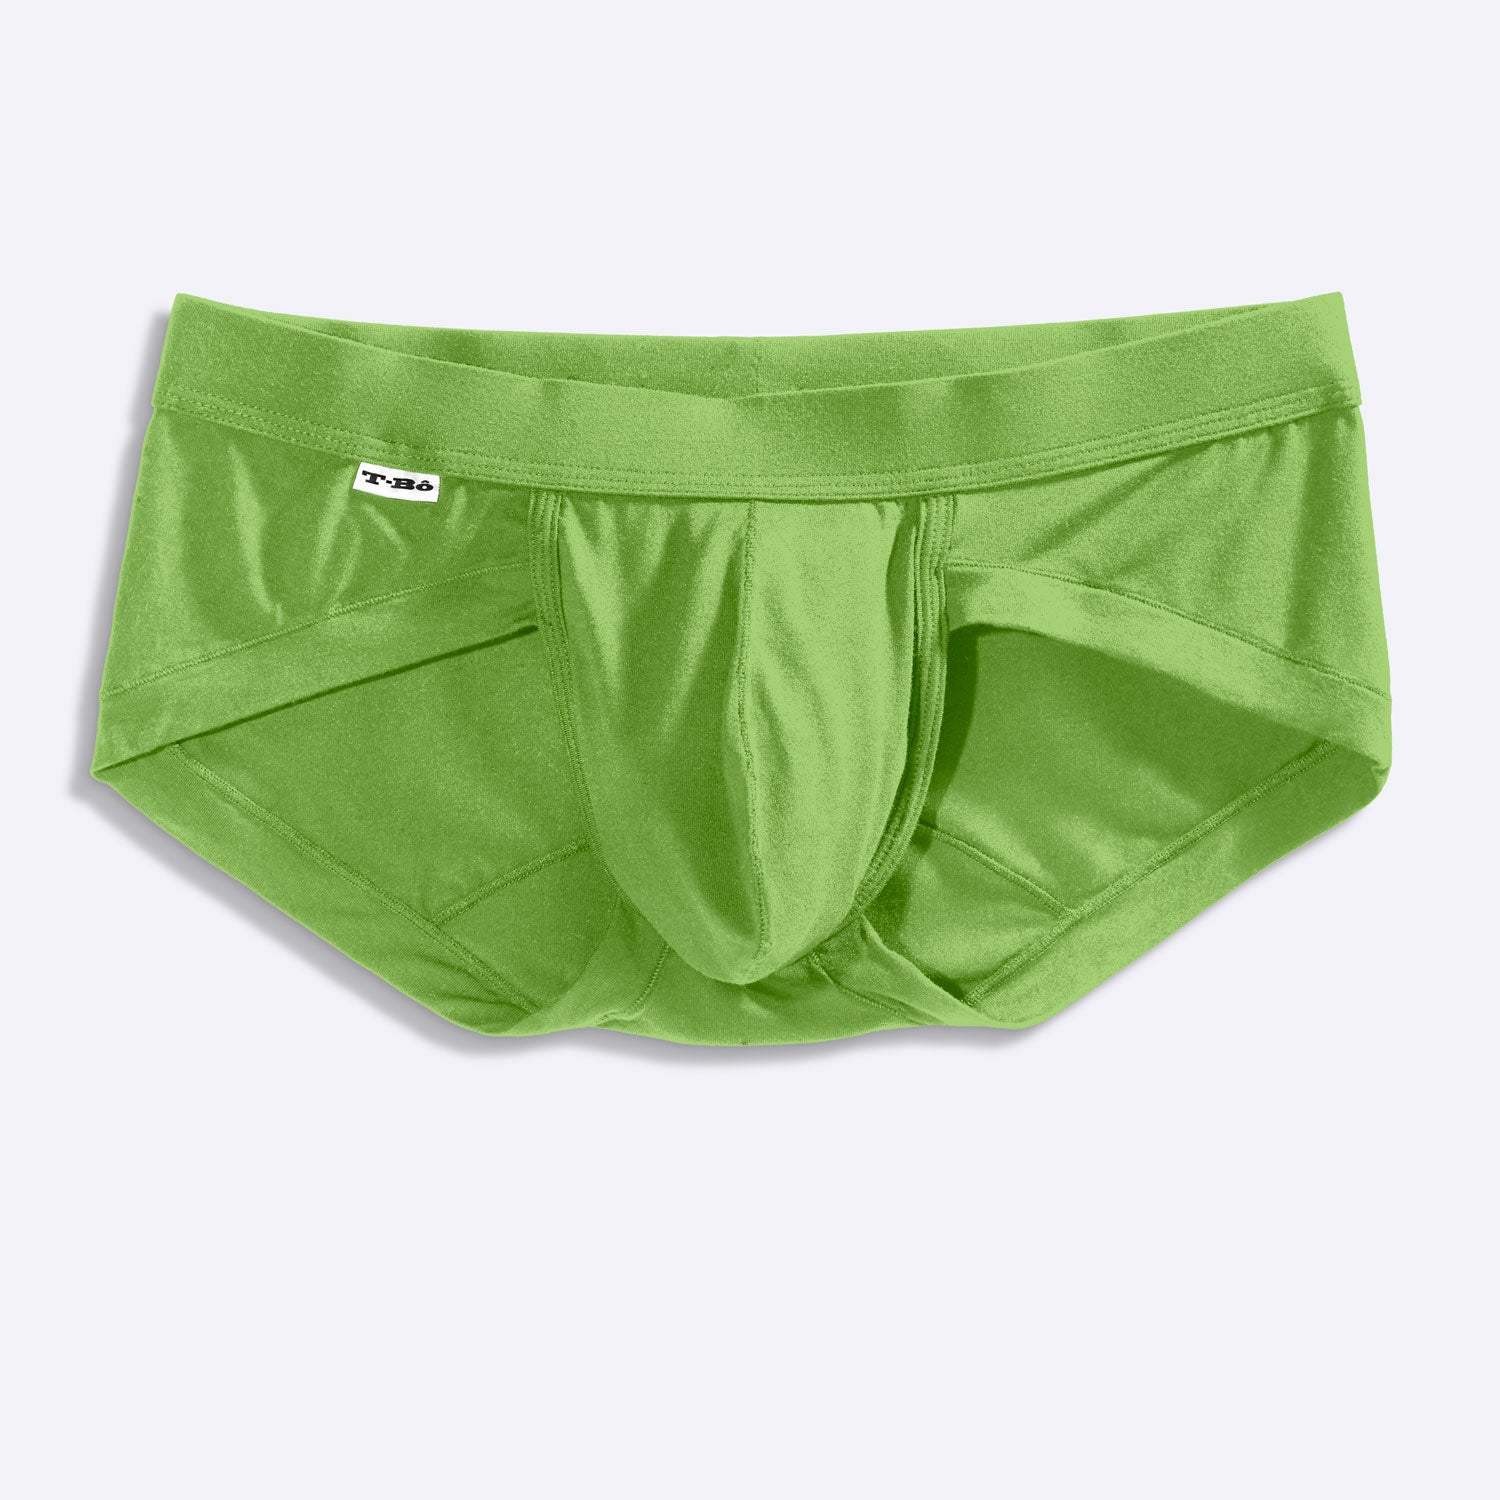 The Greenery Brief